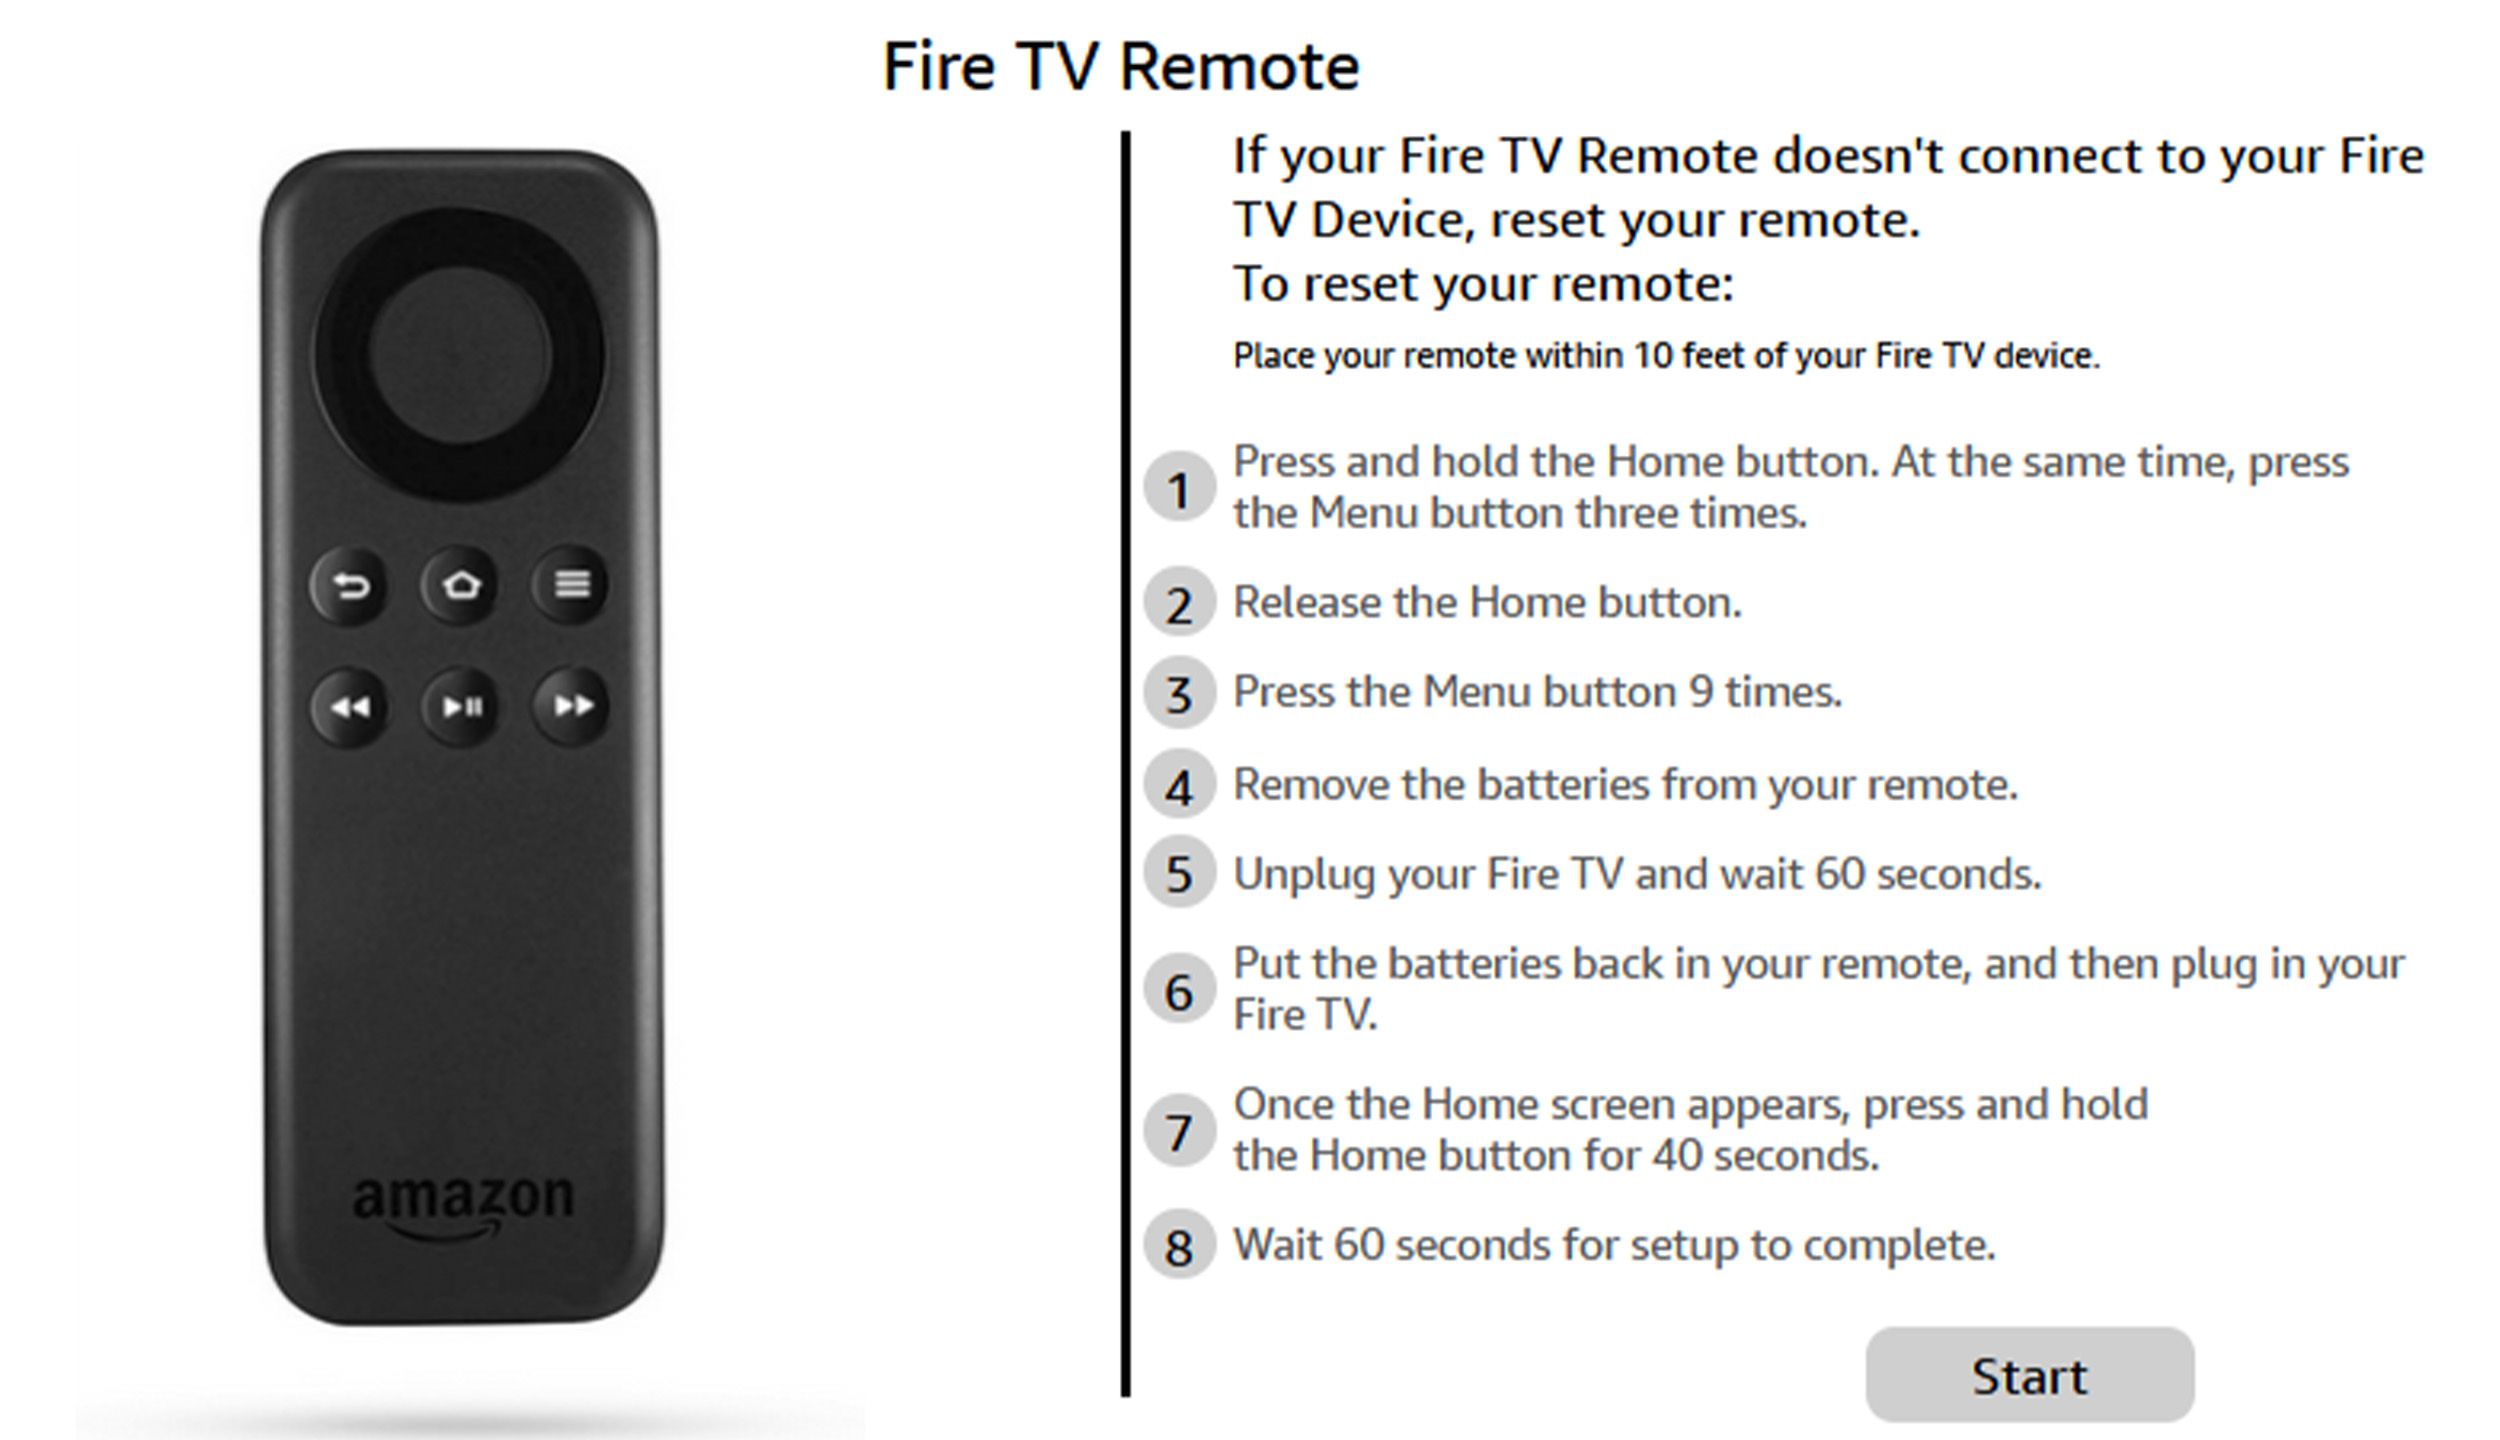 Basic Fire TV Remote pair instructions